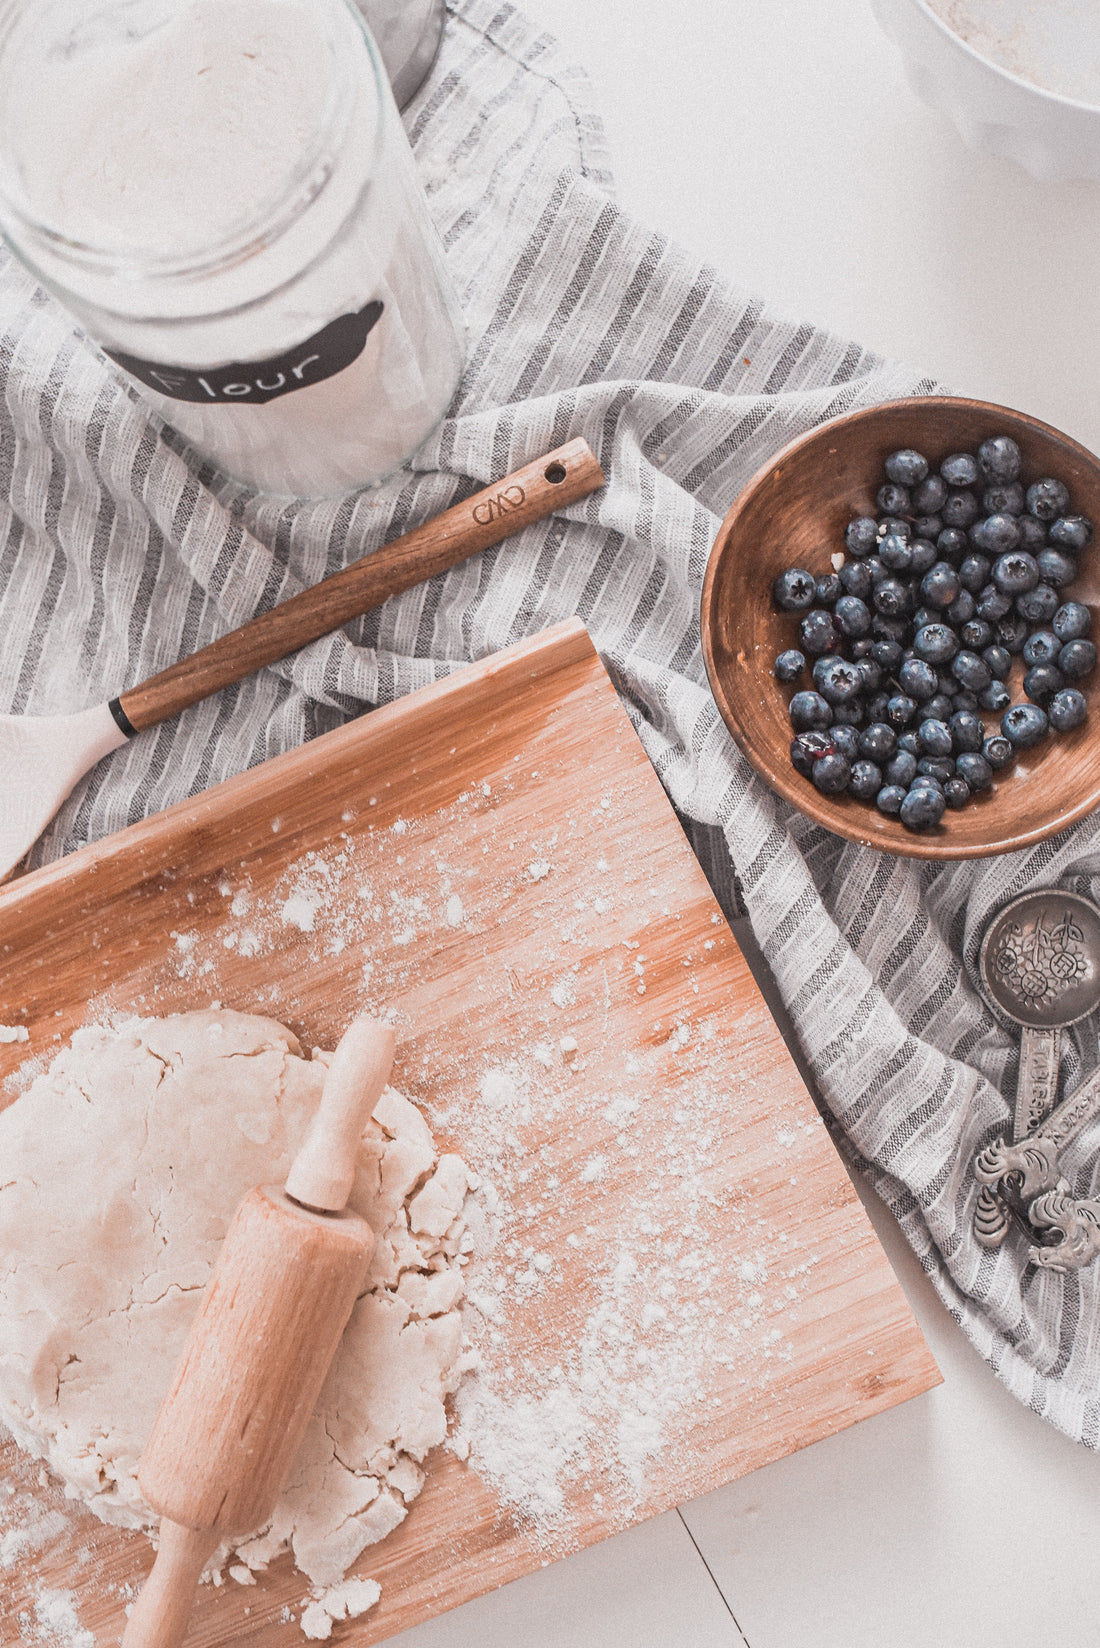 Dough, flour, and blueberries to be used for baking. Photo by Paige Cody on Unsplash